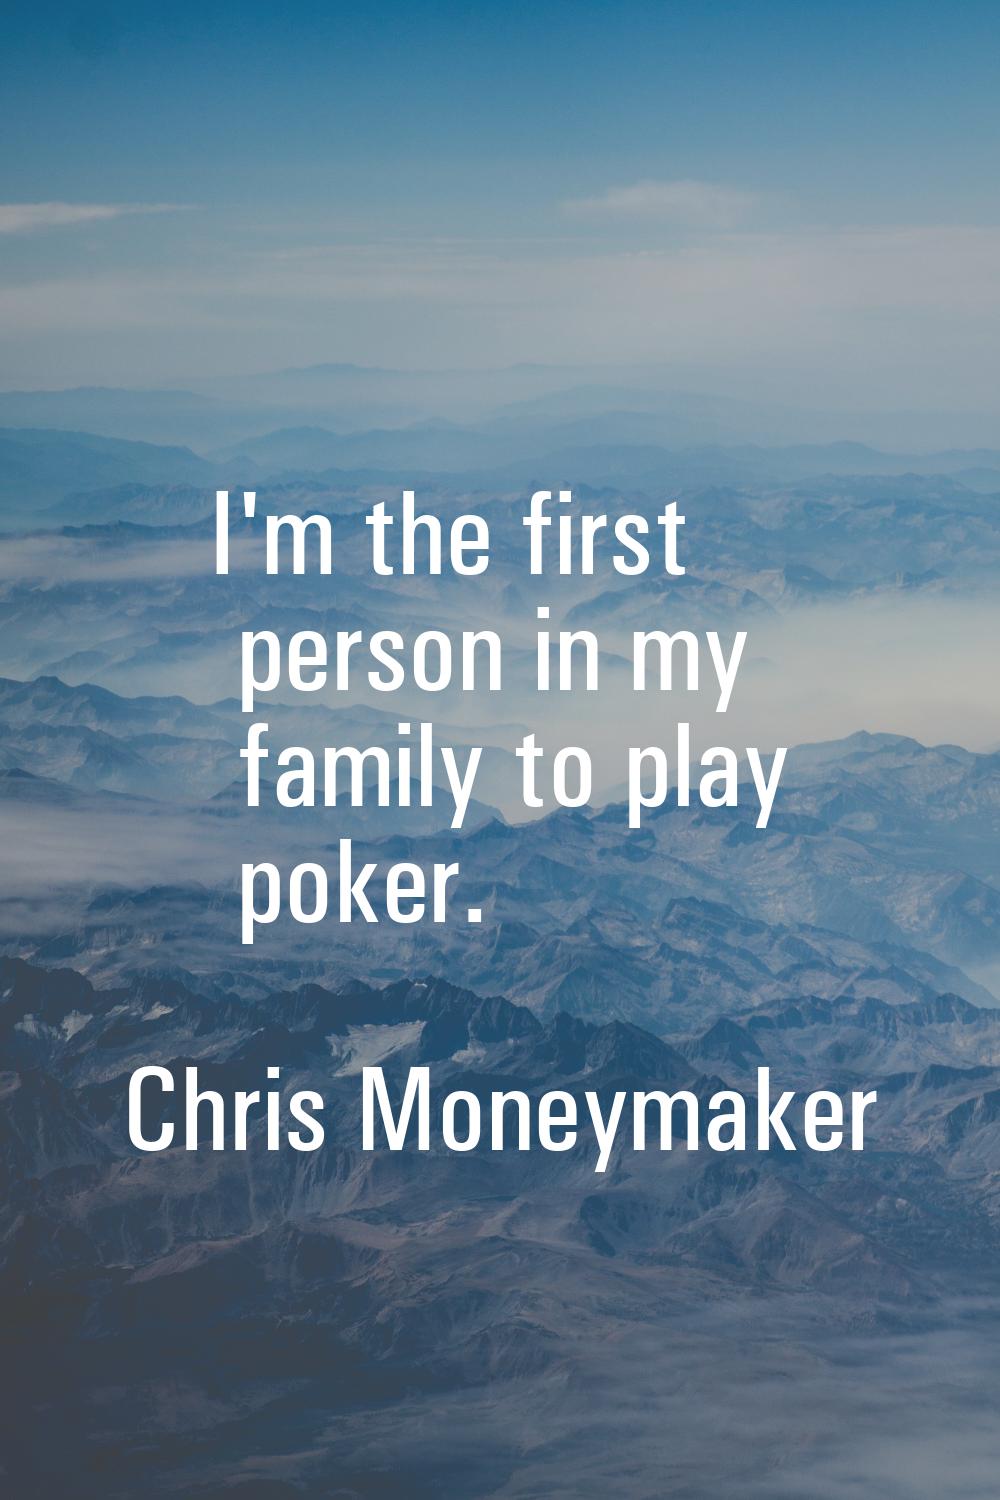 I'm the first person in my family to play poker.